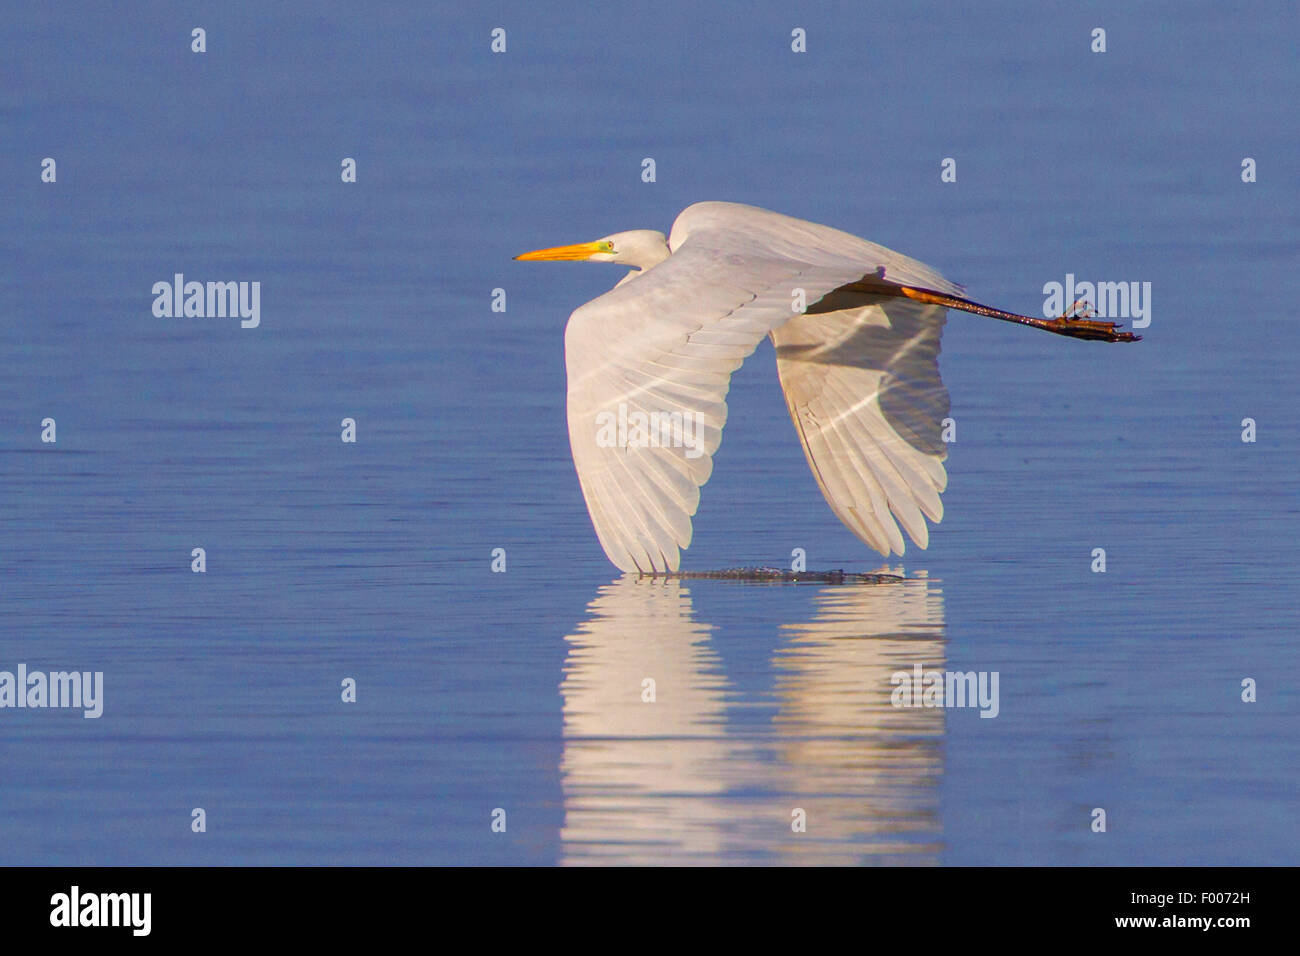 great egret, Great White Egret (Egretta alba, Casmerodius albus, Ardea alba), flying near the water surface mit the tips of the wings in the water, Germany, Bavaria, Lake Chiemsee Stock Photo